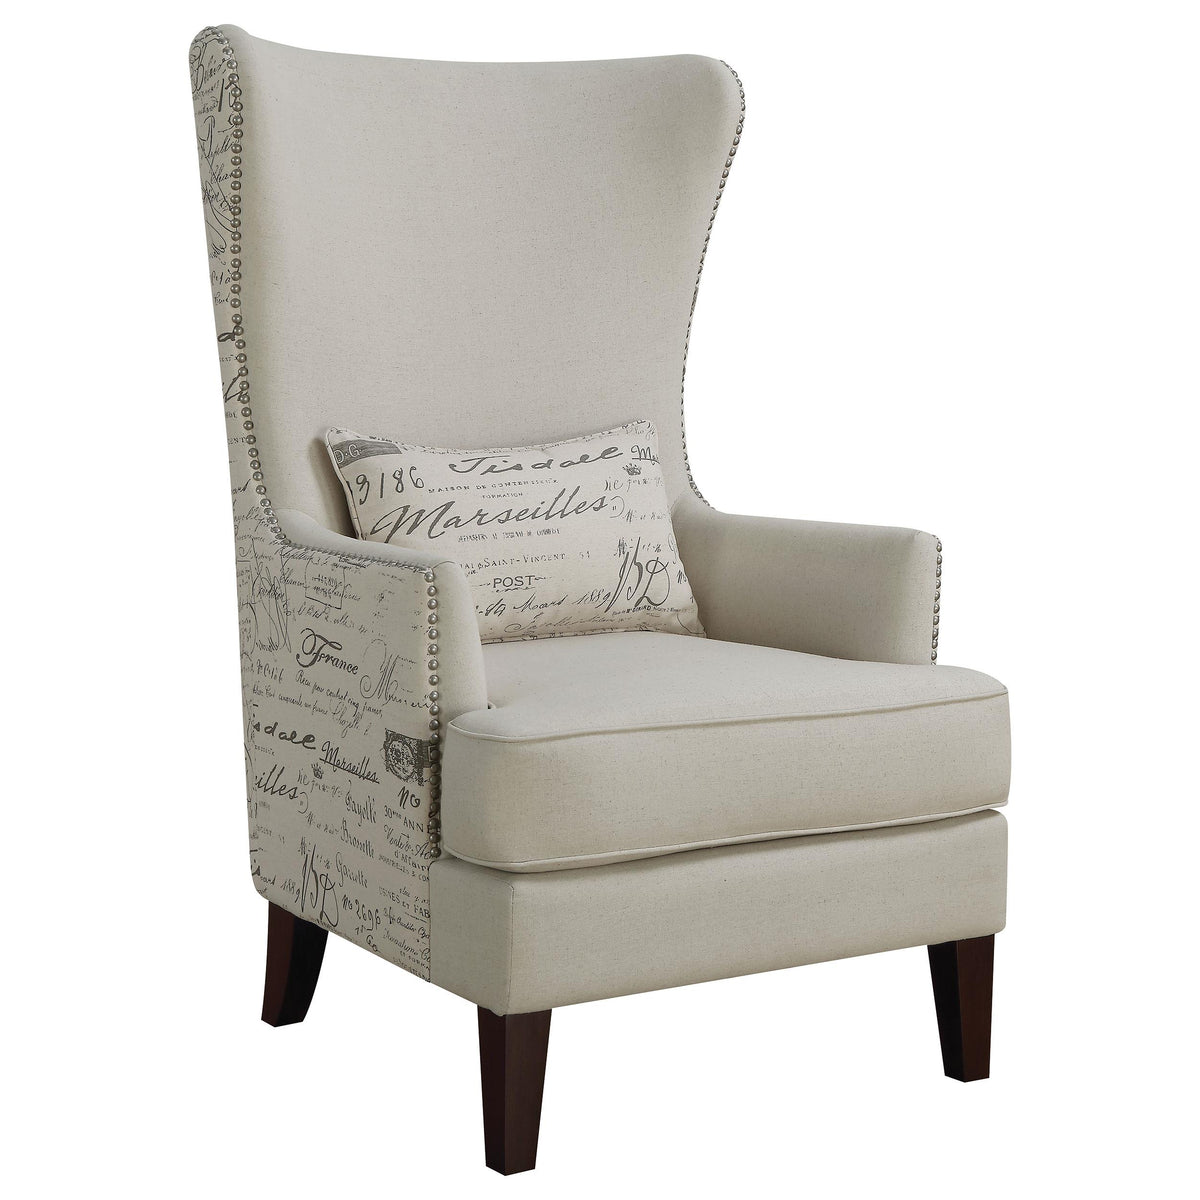 Pippin Curved Arm High Back Accent Chair Cream Pippin Curved Arm High Back Accent Chair Cream Half Price Furniture